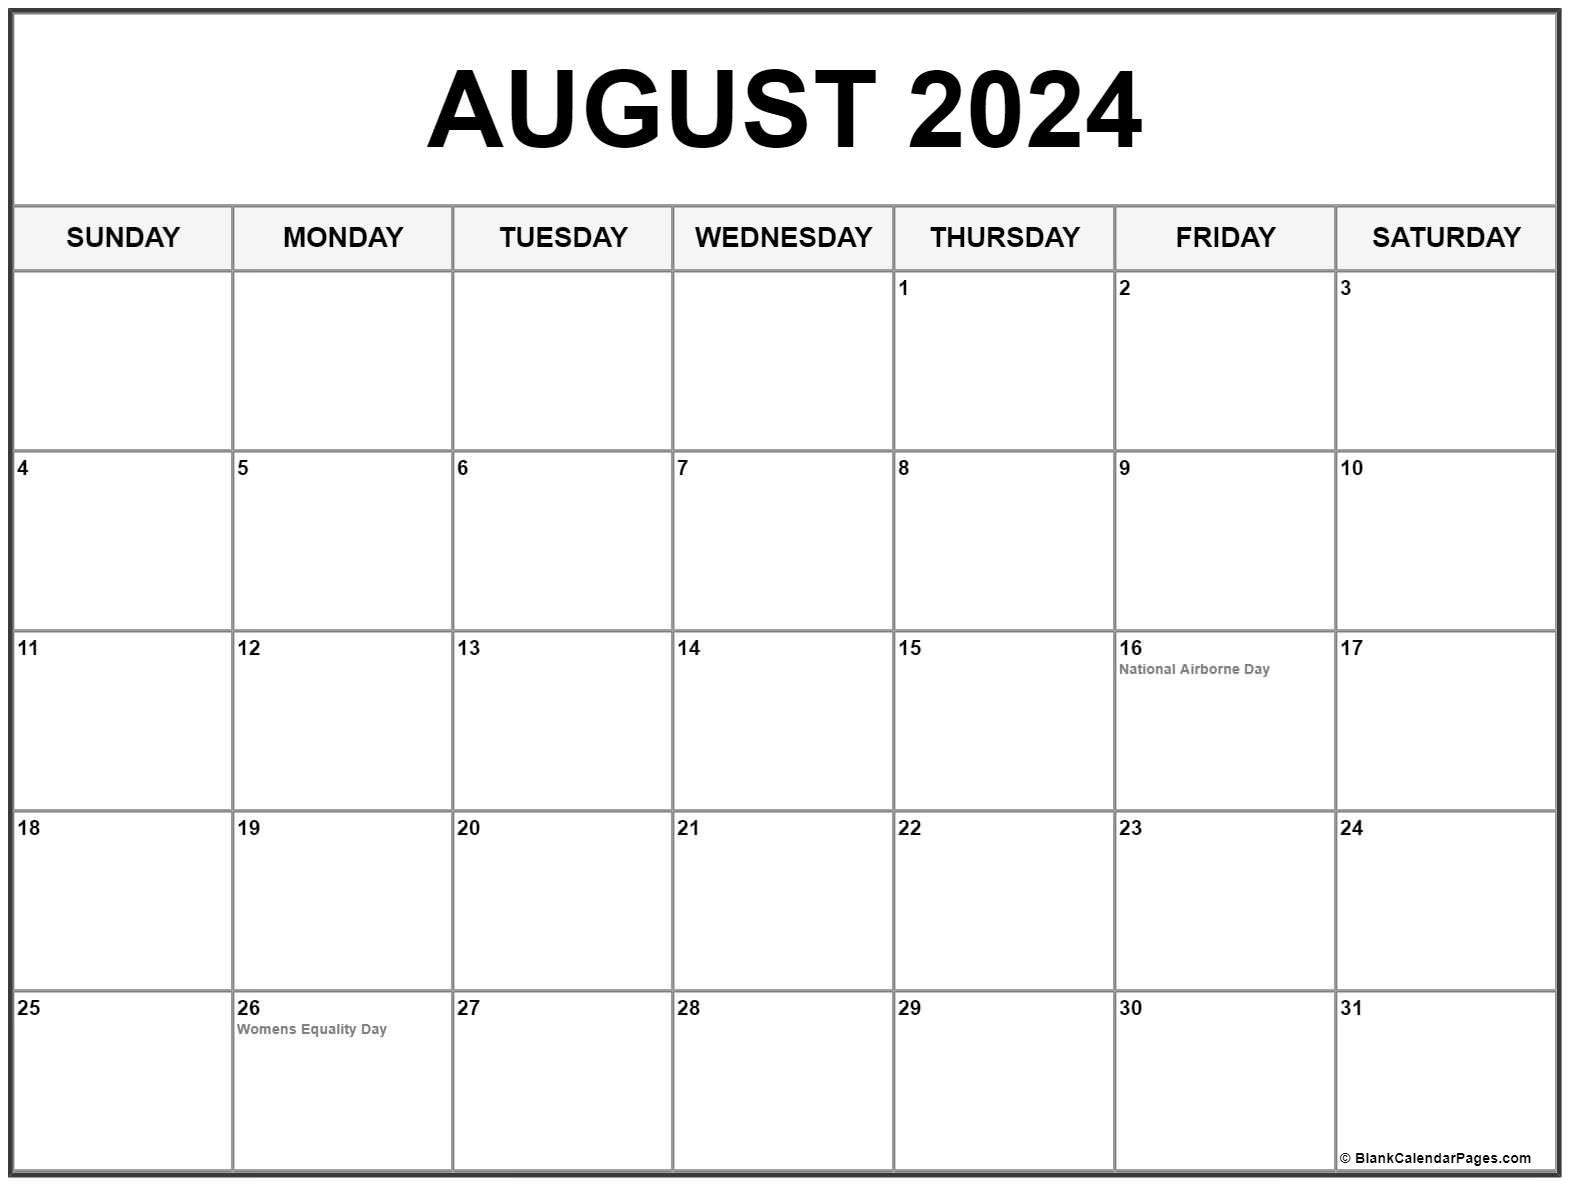 August 2024 With Holidays Calendar within Free Printable August 2024 Calendar With Holidays